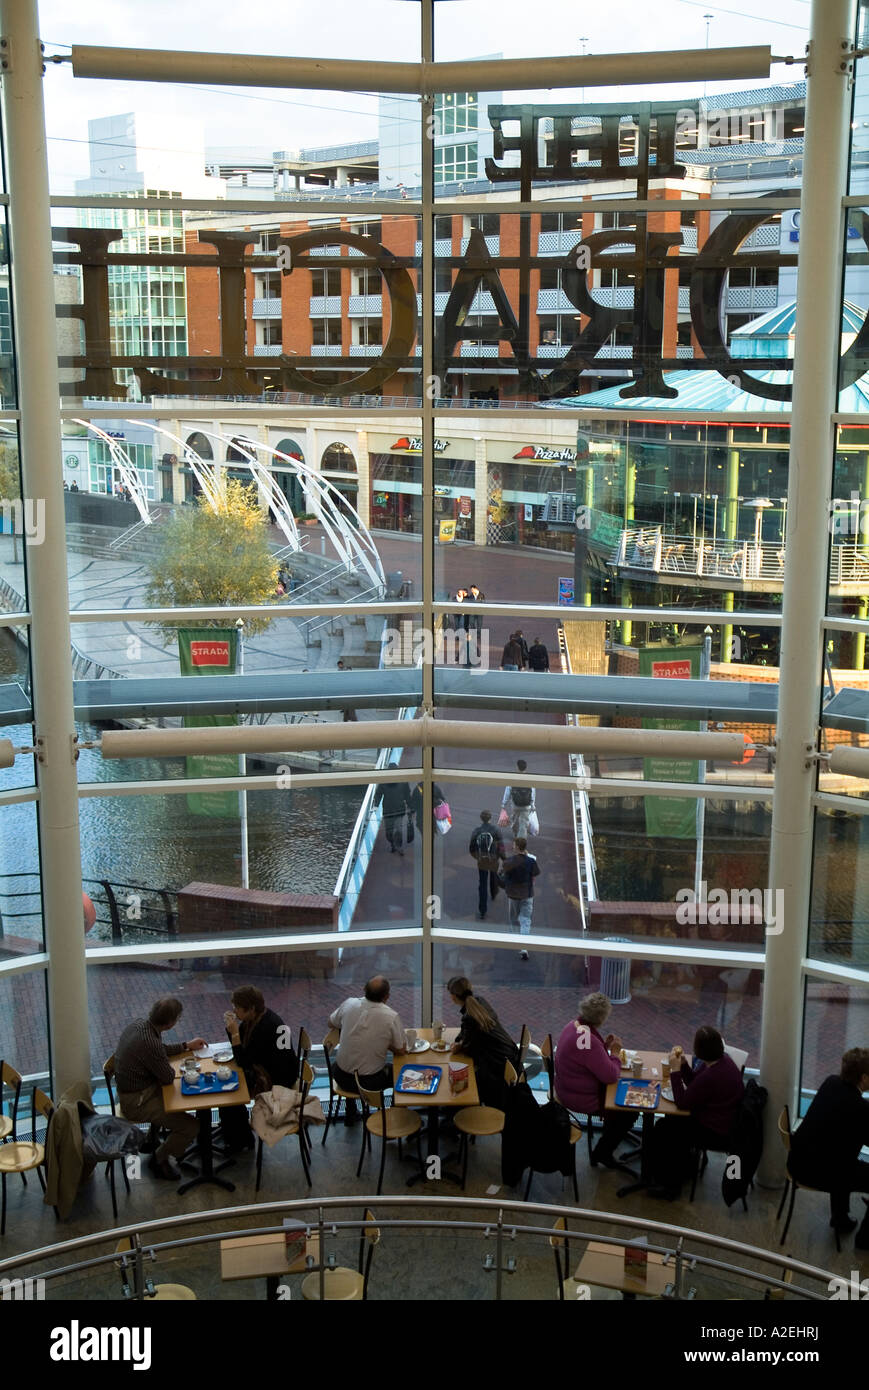 dh The Oracle READING BERKSHIRE Bistro cafe people overlooking leisure mall Kennet Riverside shopping centre Stock Photo